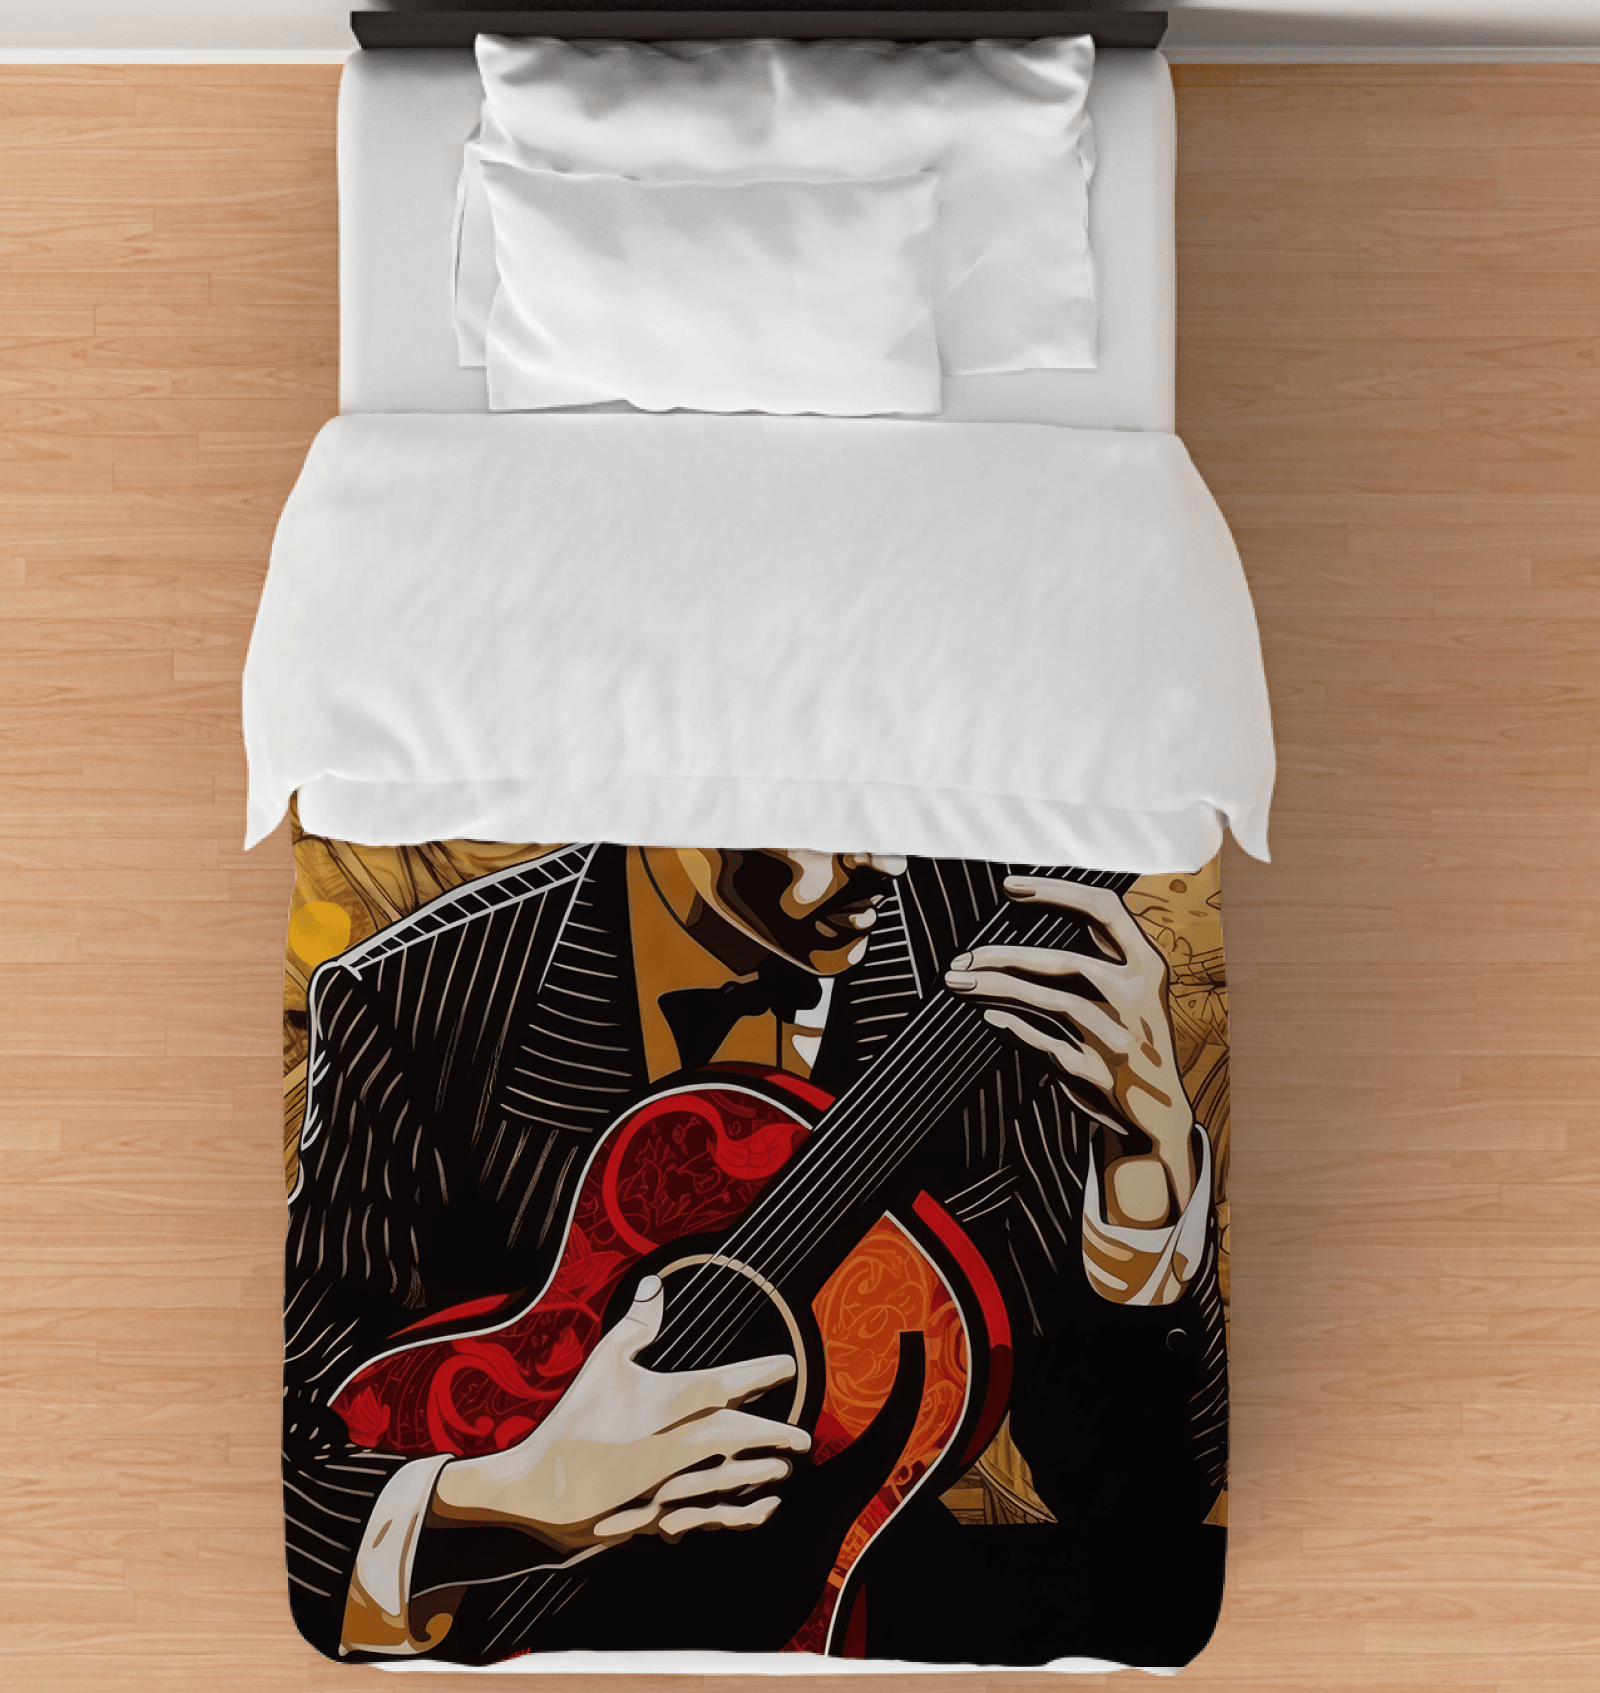 Melodies Carry Us Home Duvet Cover - Beyond T-shirts